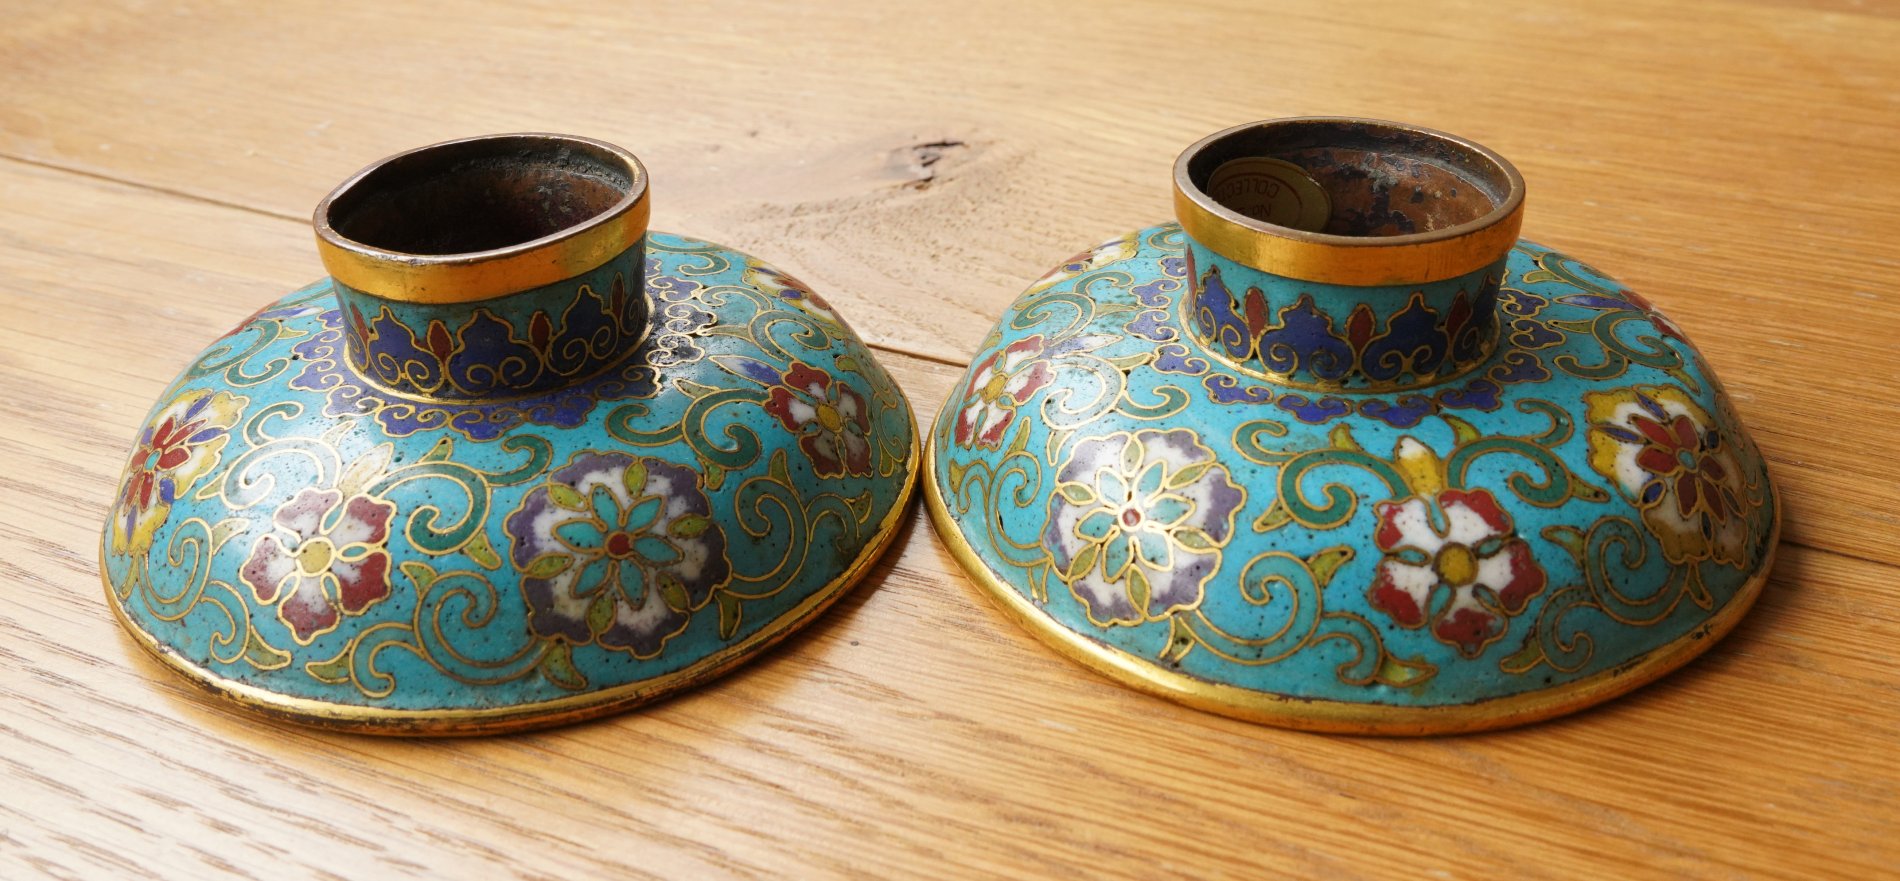 A PAIR OF CHINESE SMALL GILT-BRONZE AND CLOISONNE ENAMEL STEM DISHES (2) - Image 3 of 6